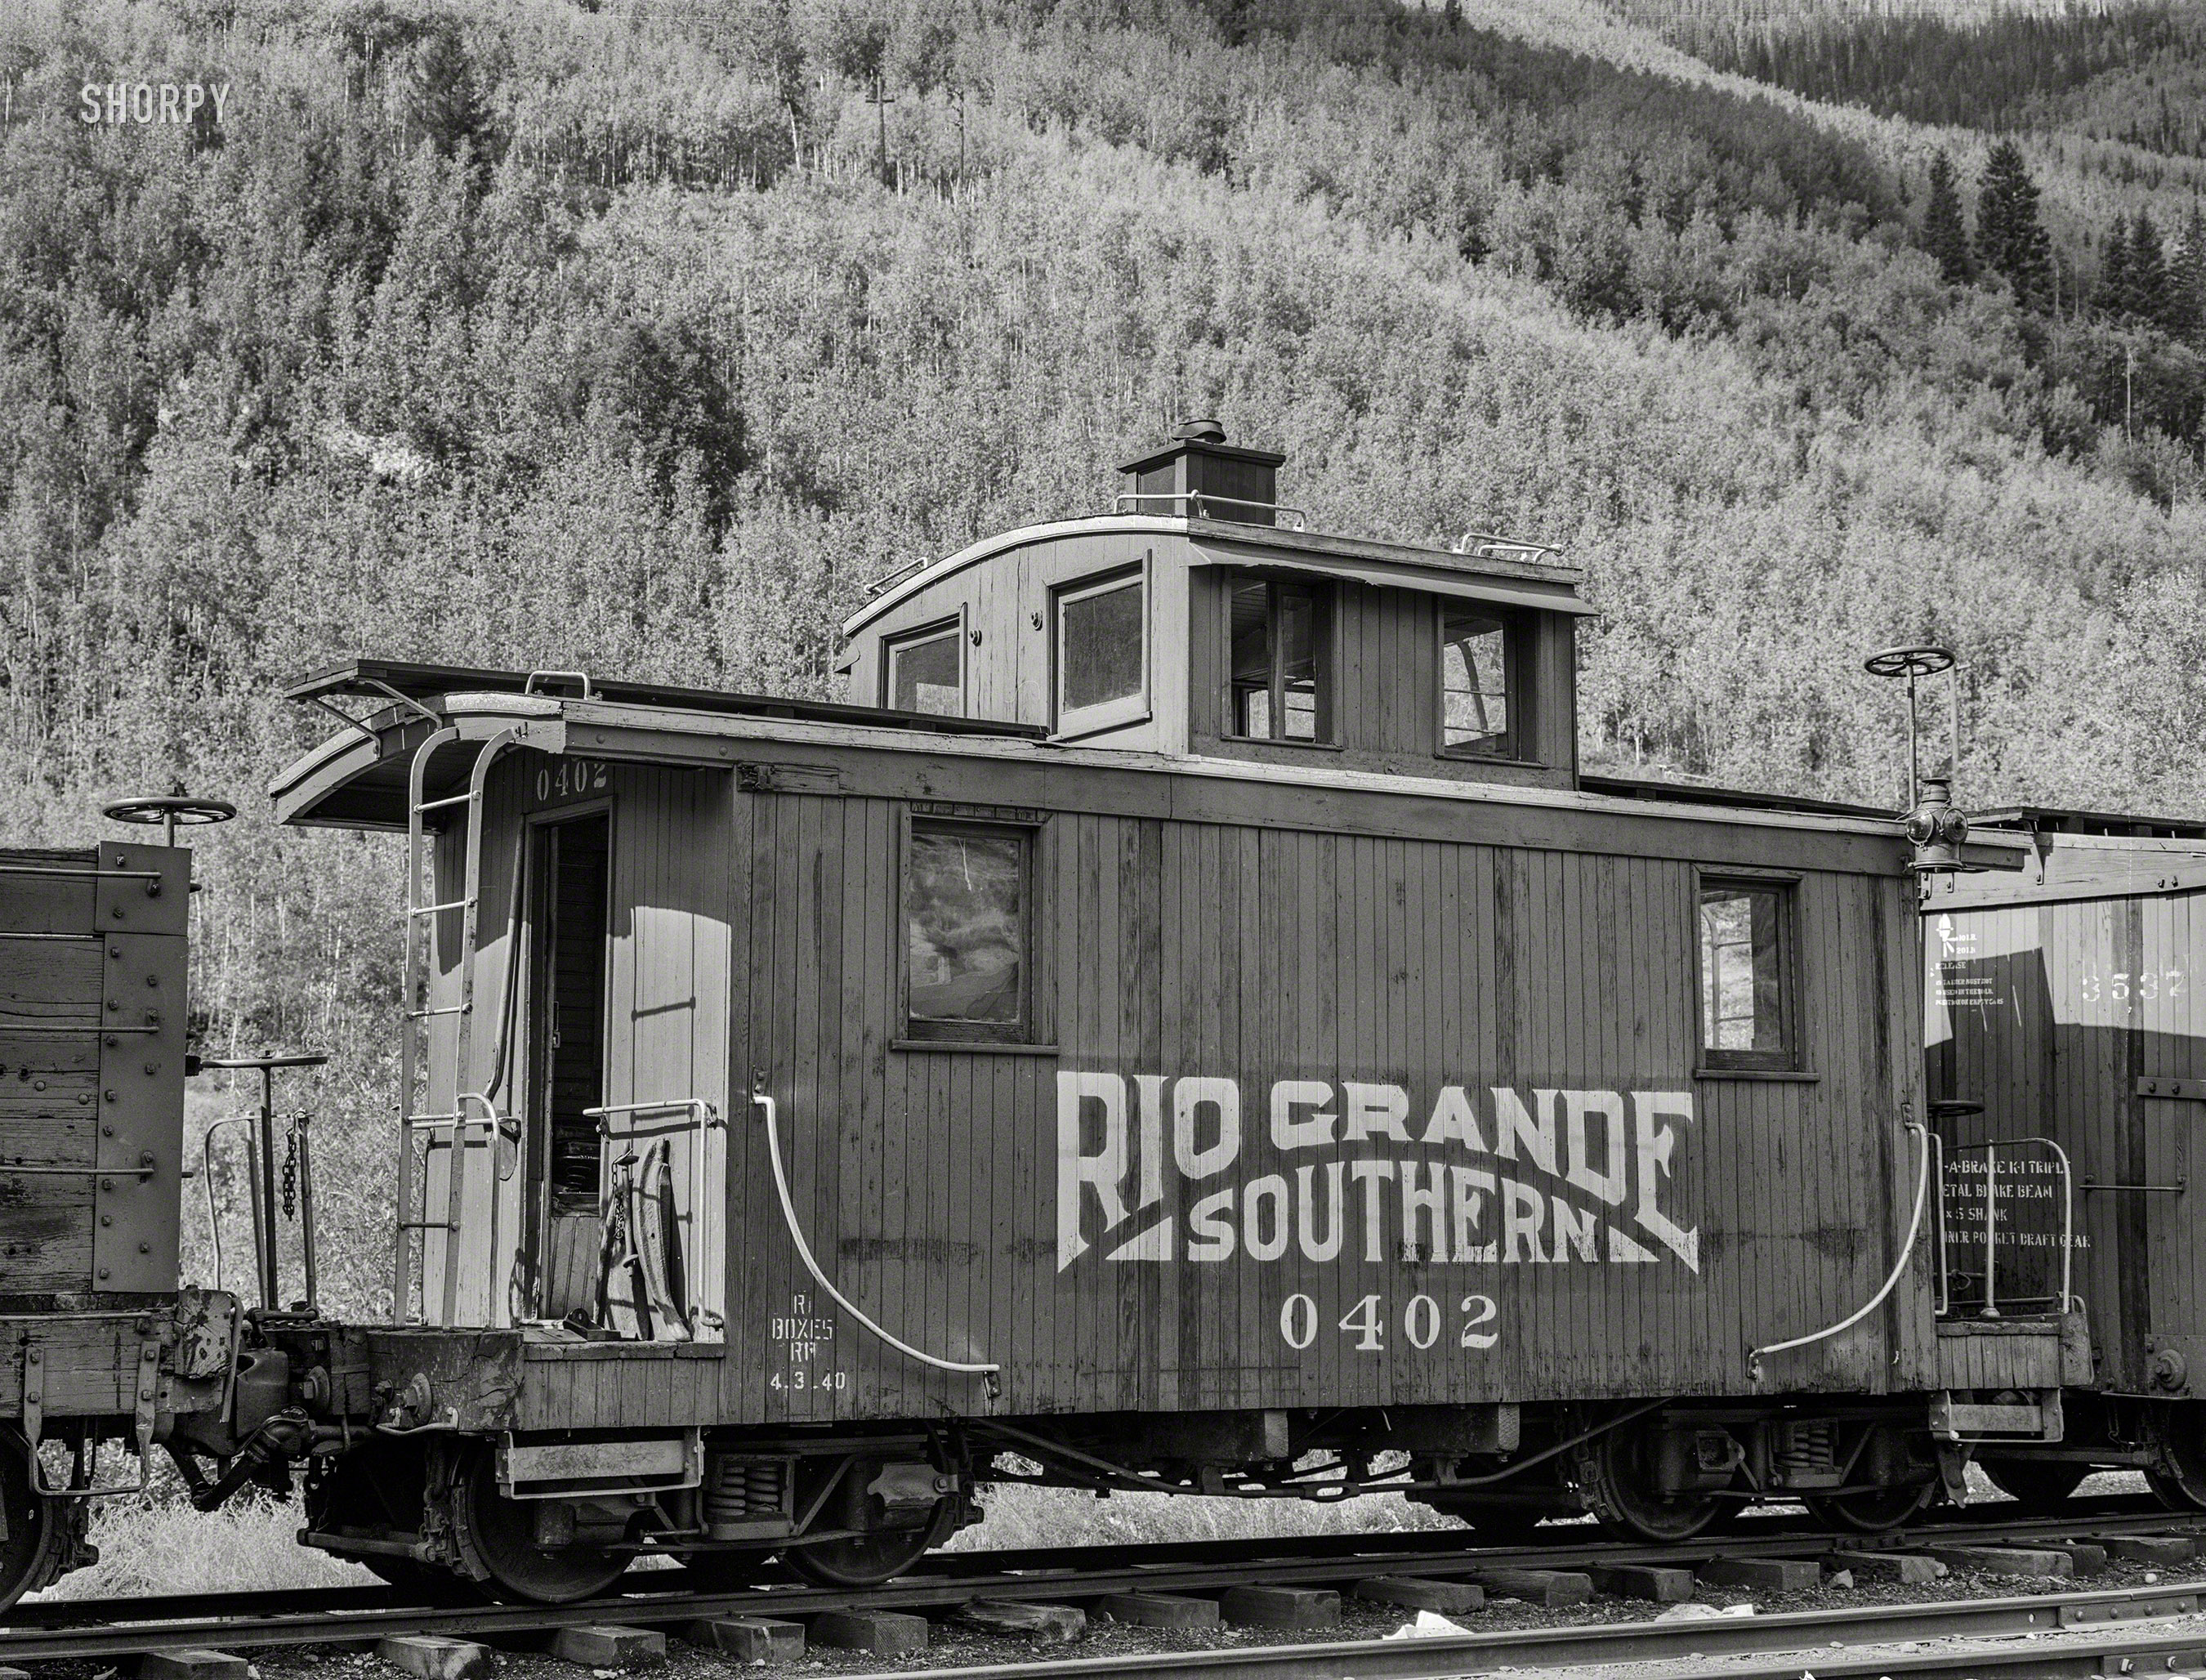 September 1940. "Caboose of the Rio Grande Southern narrow gauge railway. Telluride, Colorado." Acetate negative by Russell Lee for the Farm Security Administration. View full size.